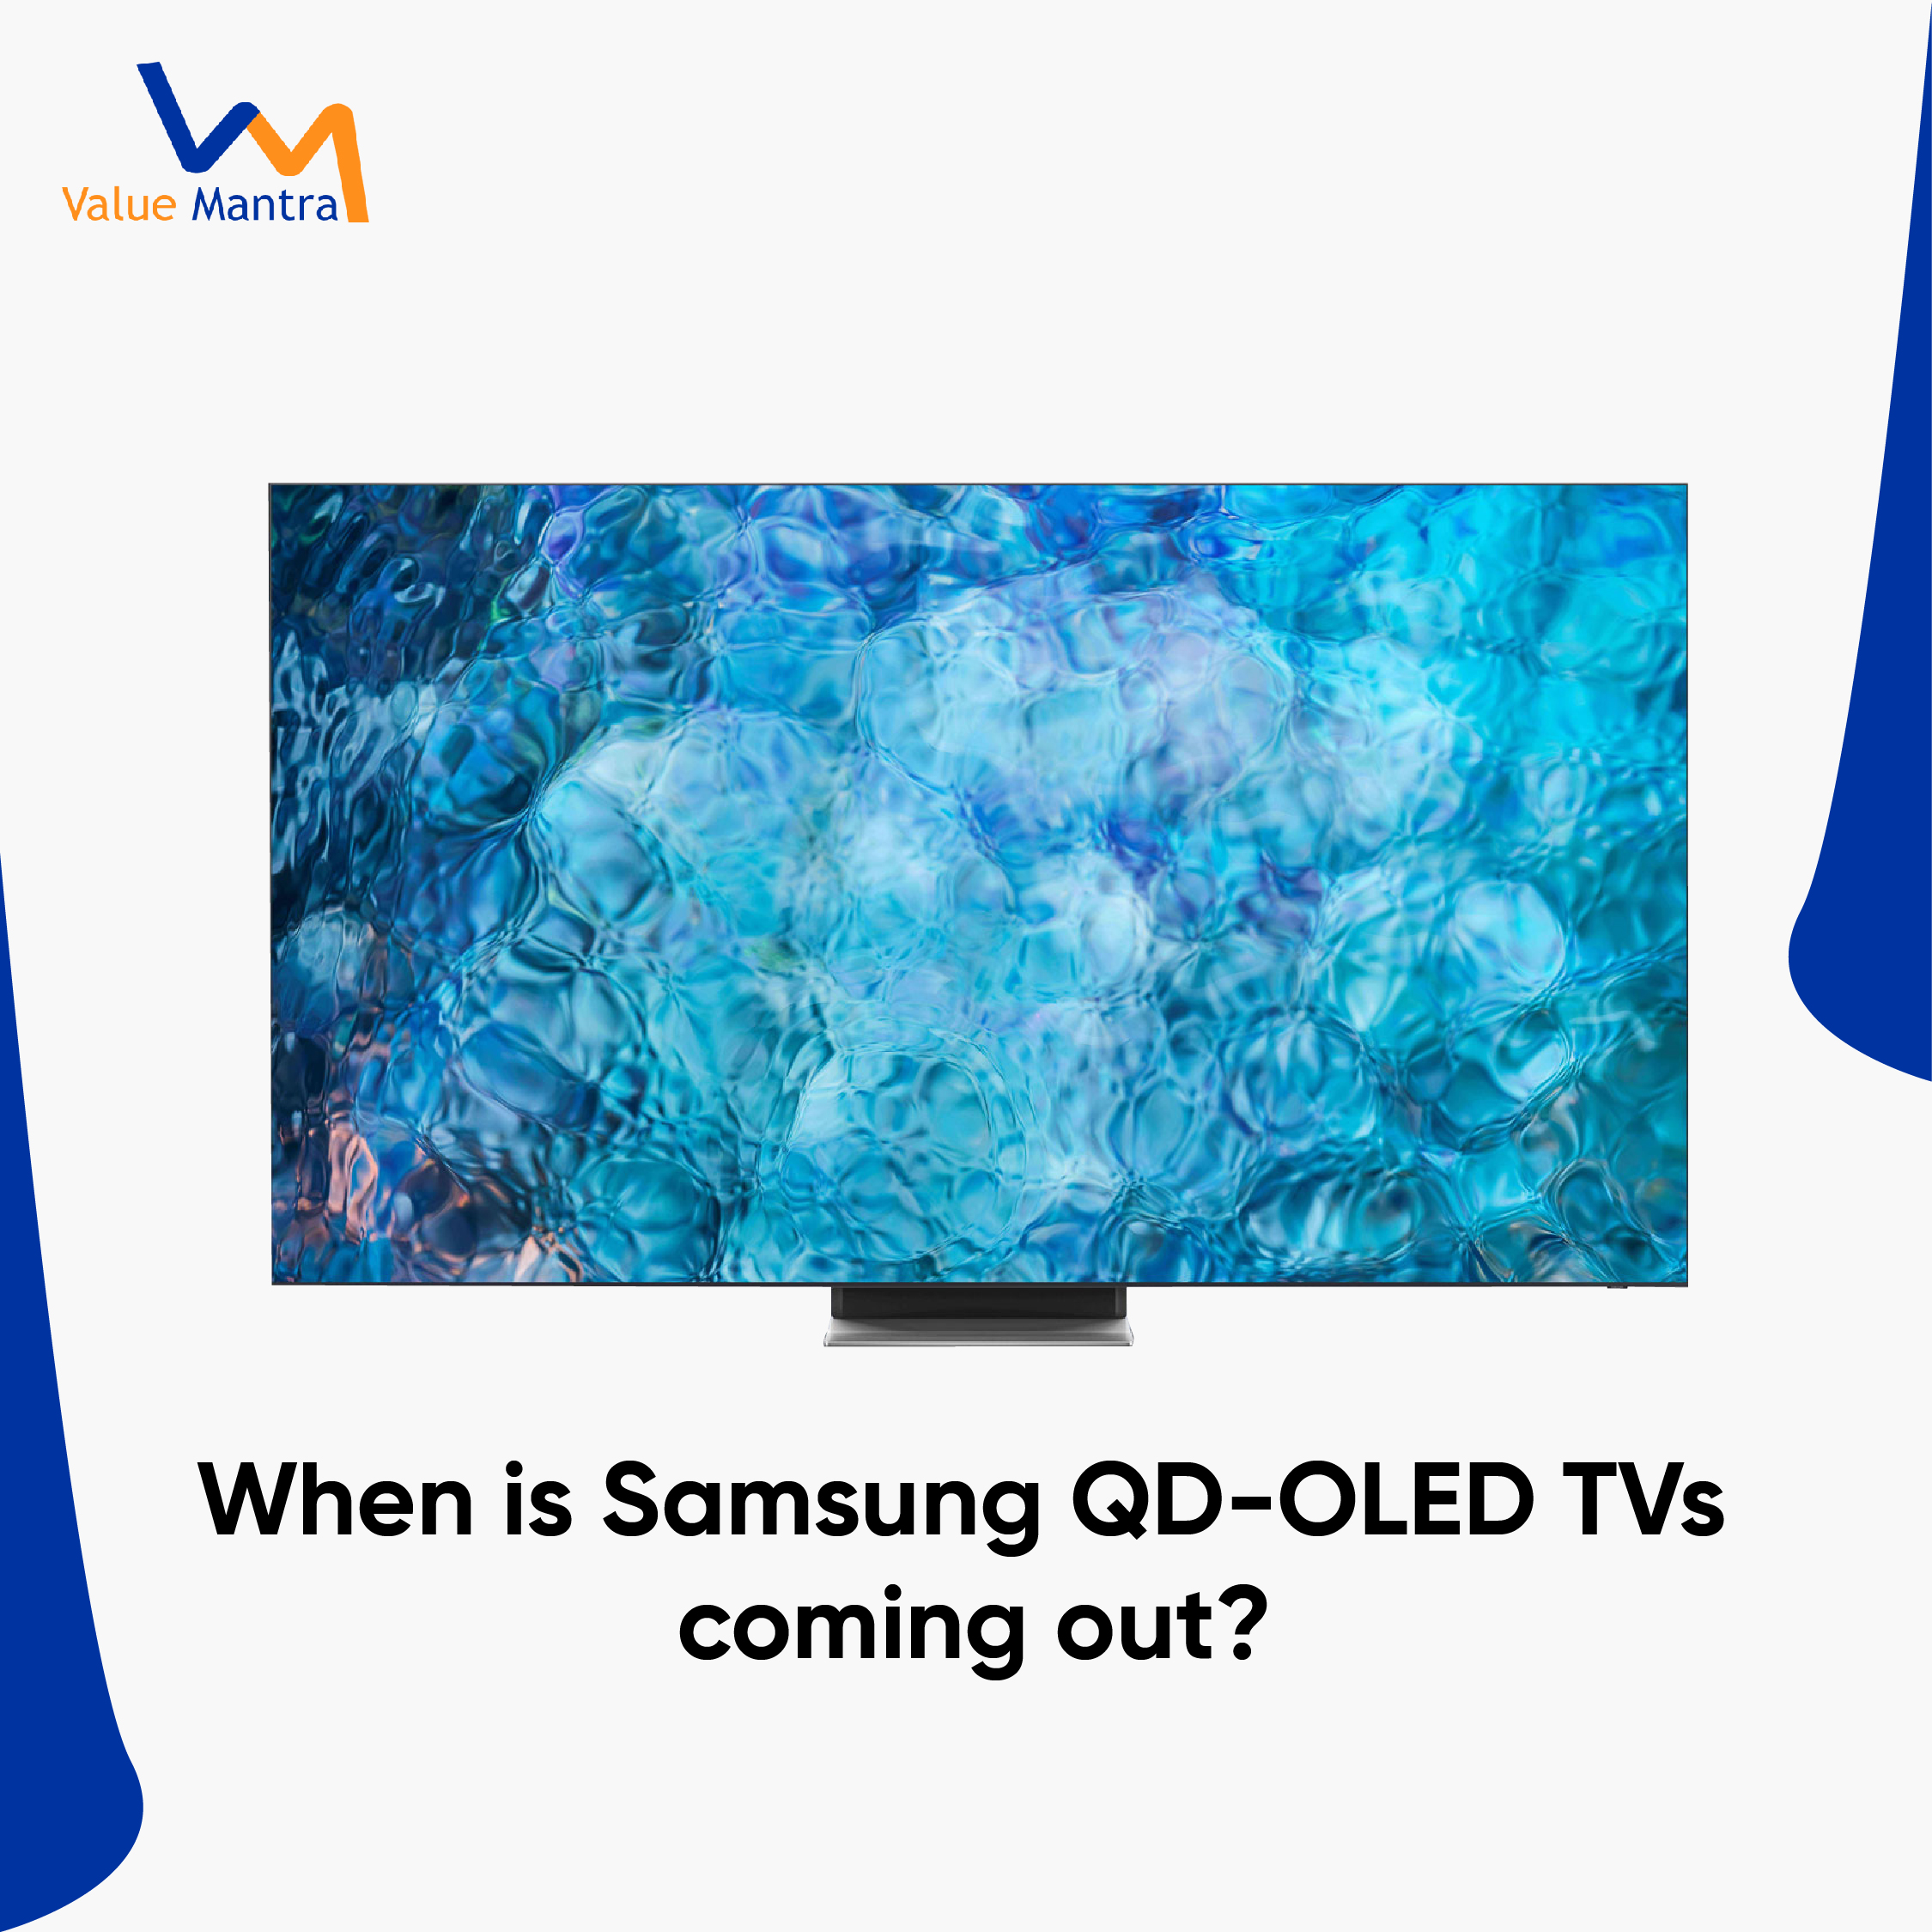 When is Samsung QD-OLED TVs coming out?